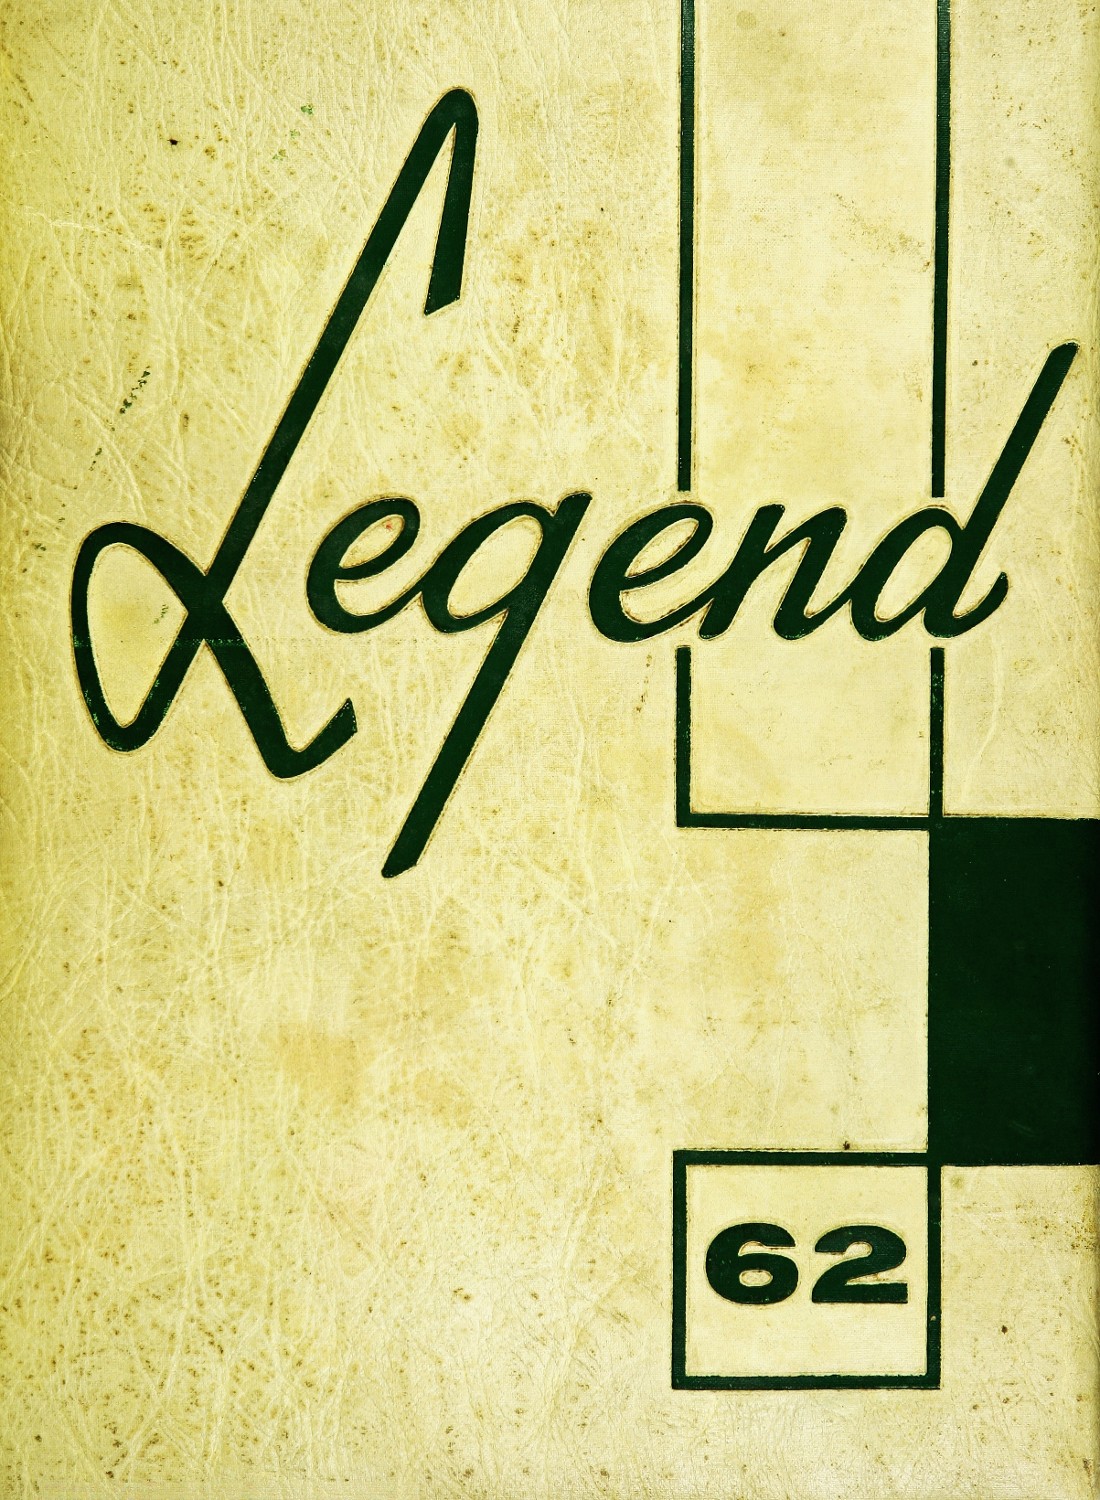 1962 yearbook from Lafayette High School 400 from Brooklyn, New York